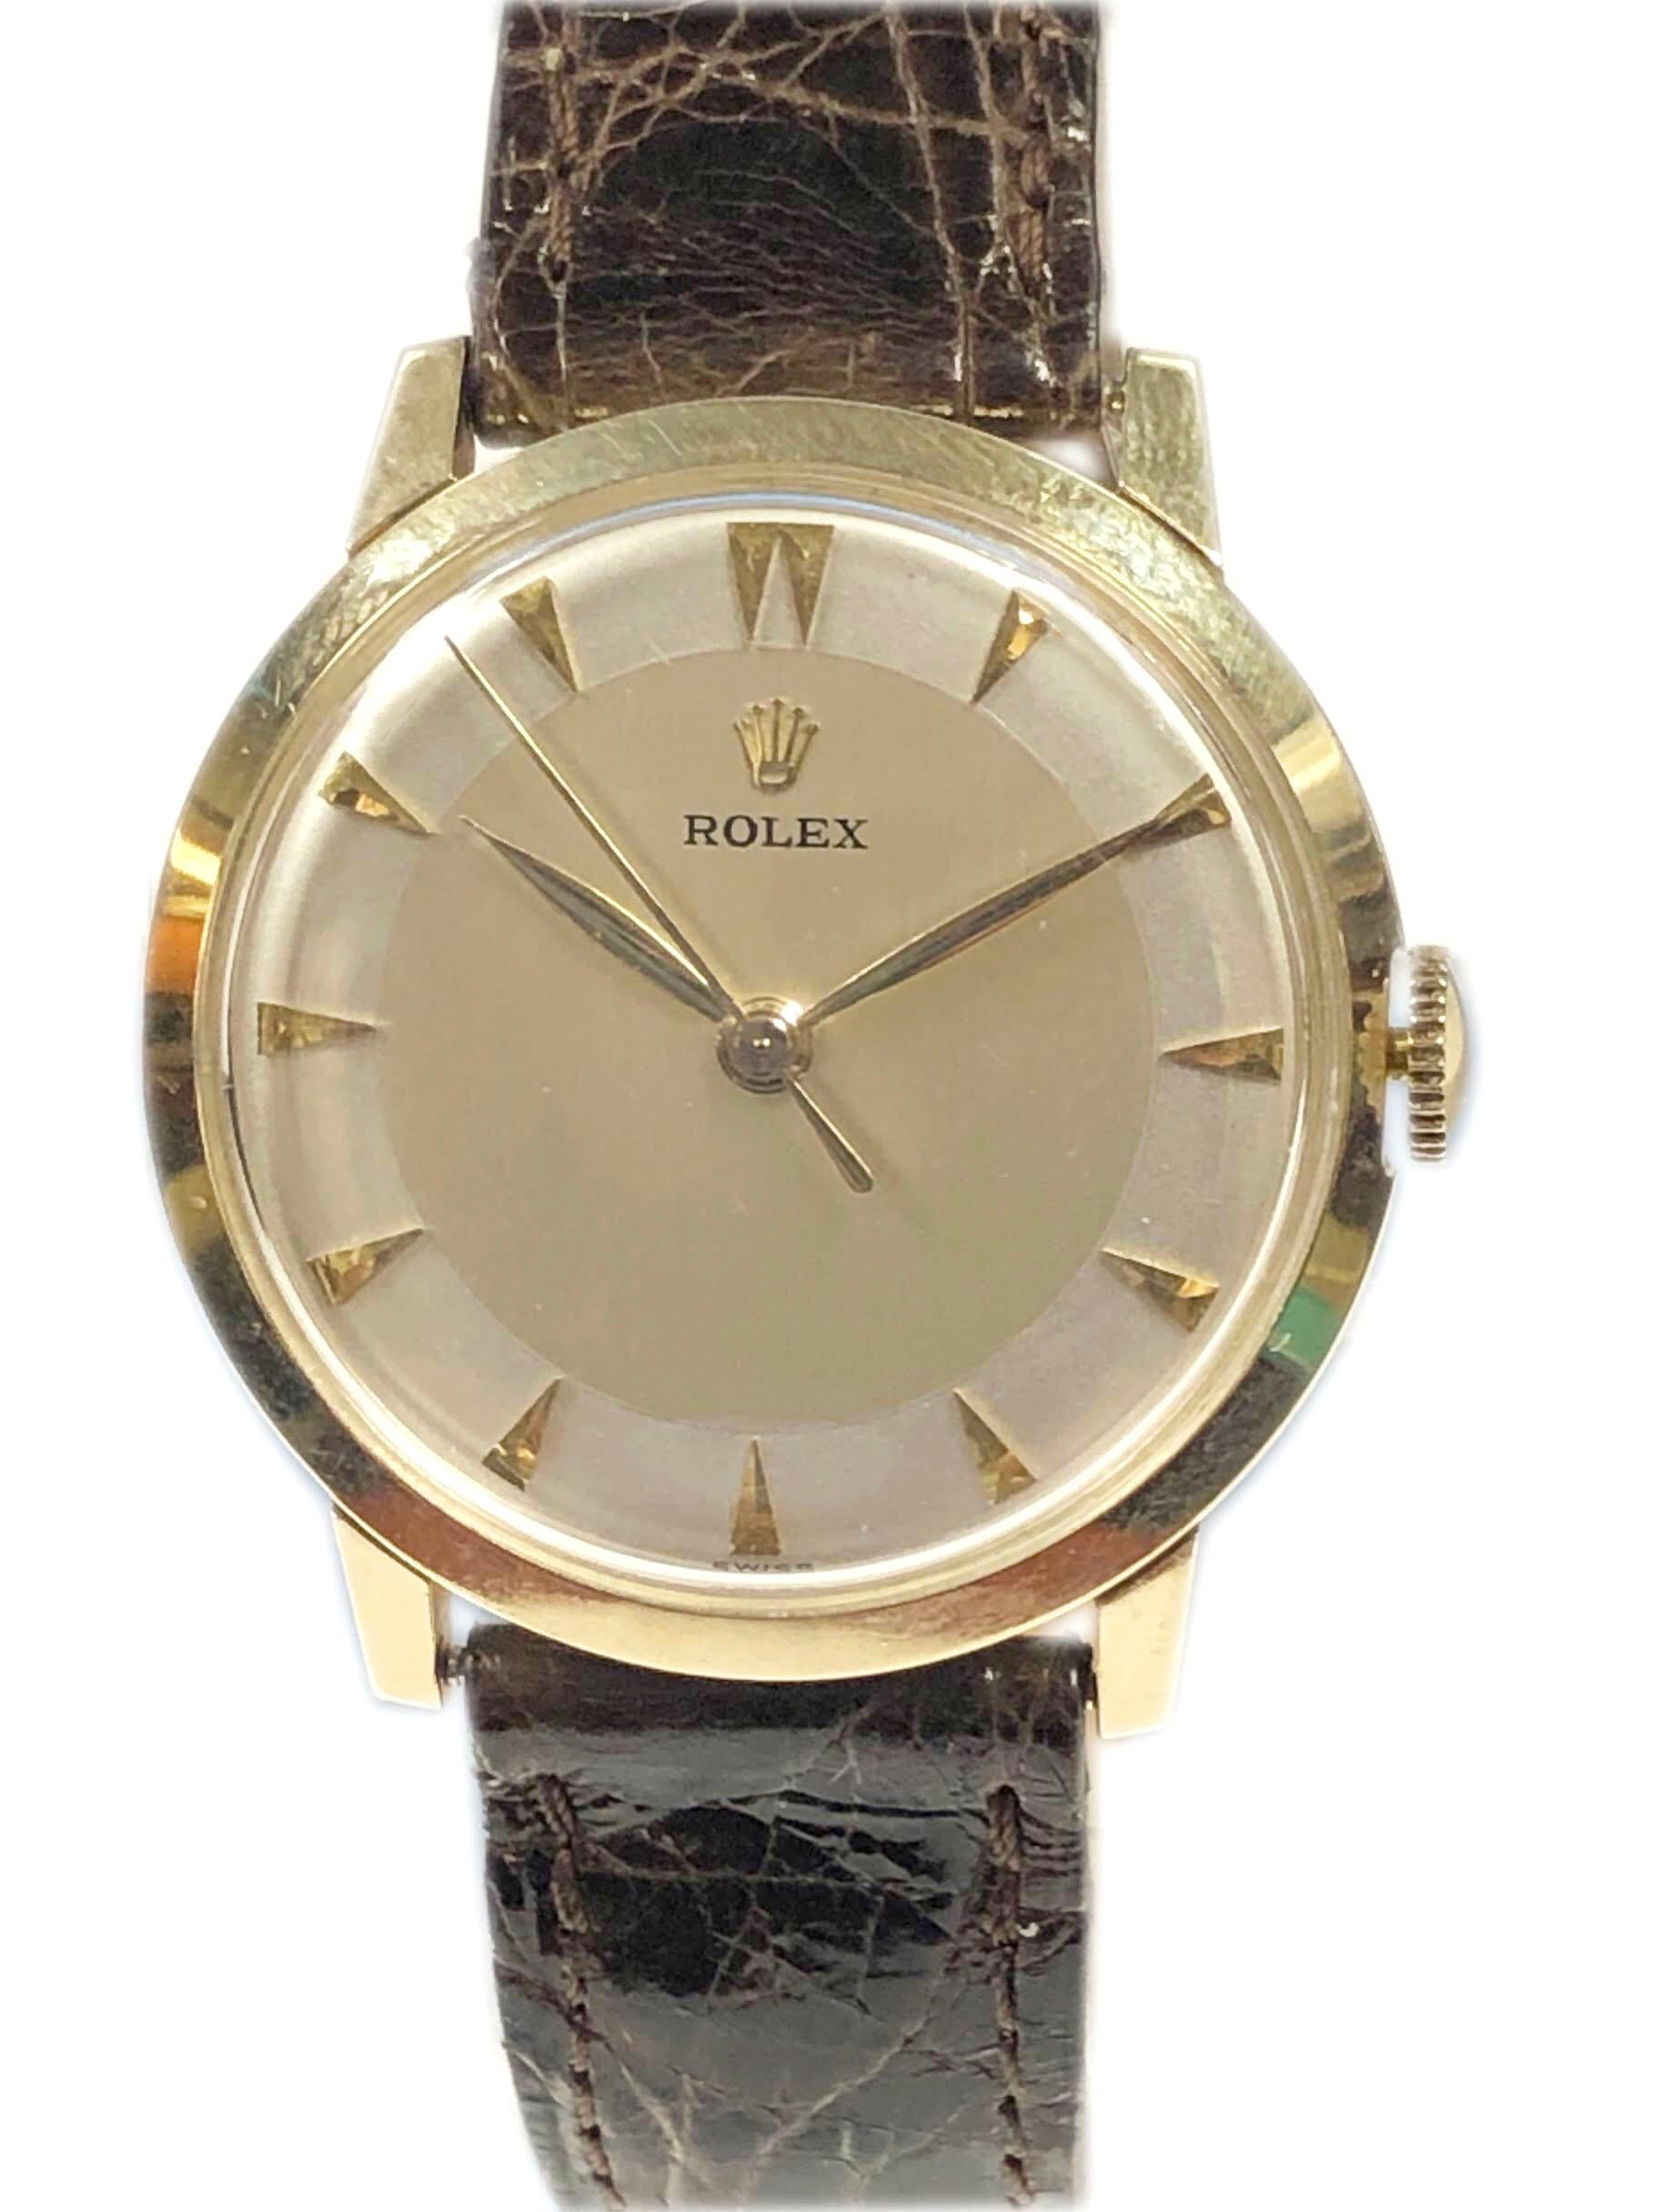 Circa 1960s Rolex Wrist Watch, 33 M.M. 14K 2 piece case, 9 M.M. thick, 17 Jewel Mechanical, Manual wind Nickle lever movement, 2 tone Silver Satin Pie pan dial with raised Gold markers and a sweep seconds hand. New deBeer Brown Crocodile  strap with